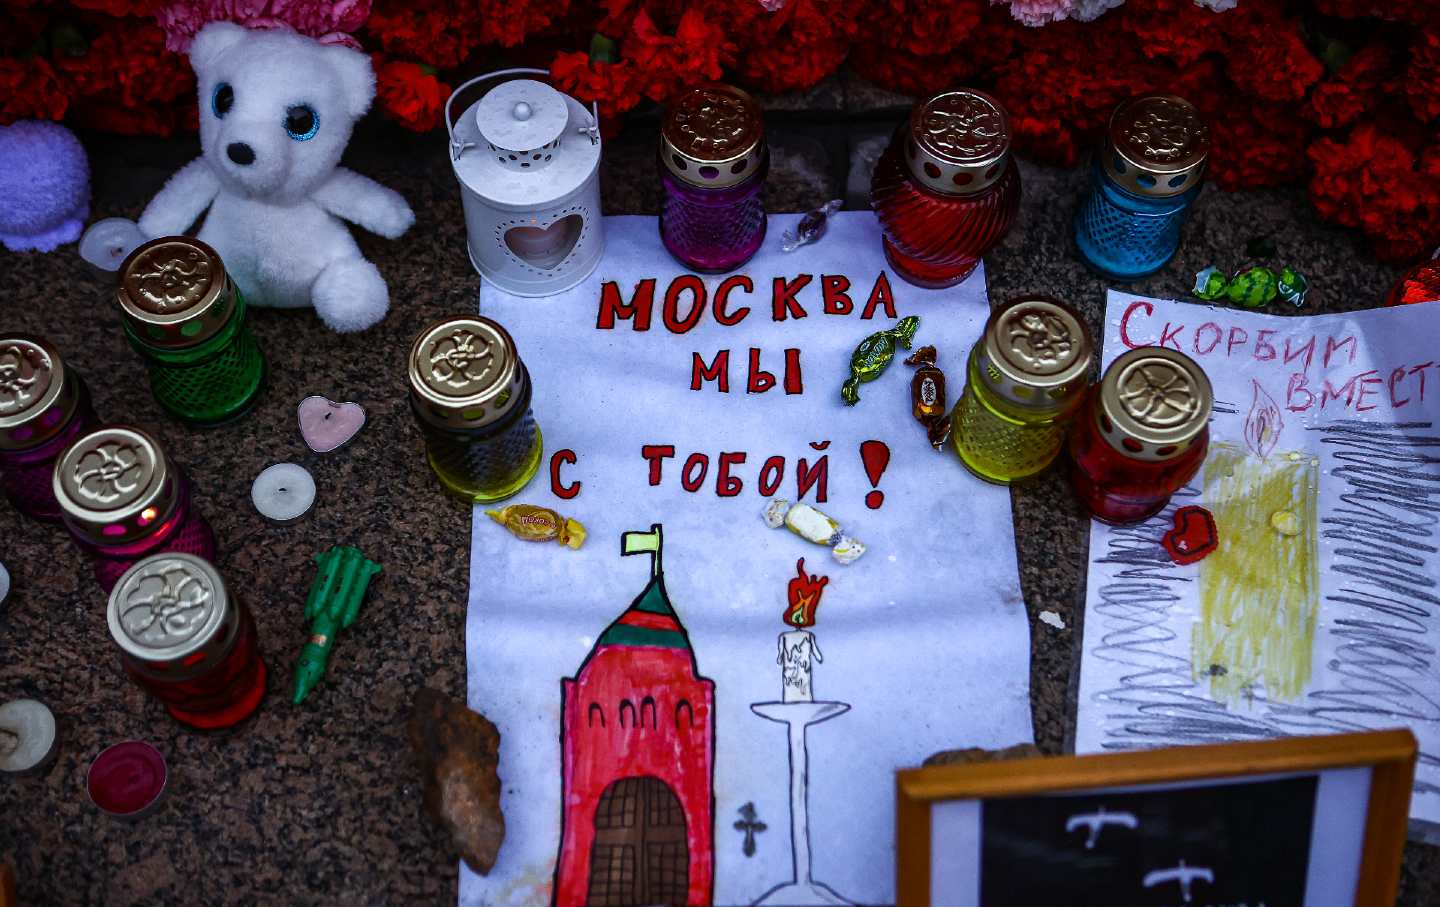 Commemoration in Novosibirsk for victims of Moscow concert hall attack